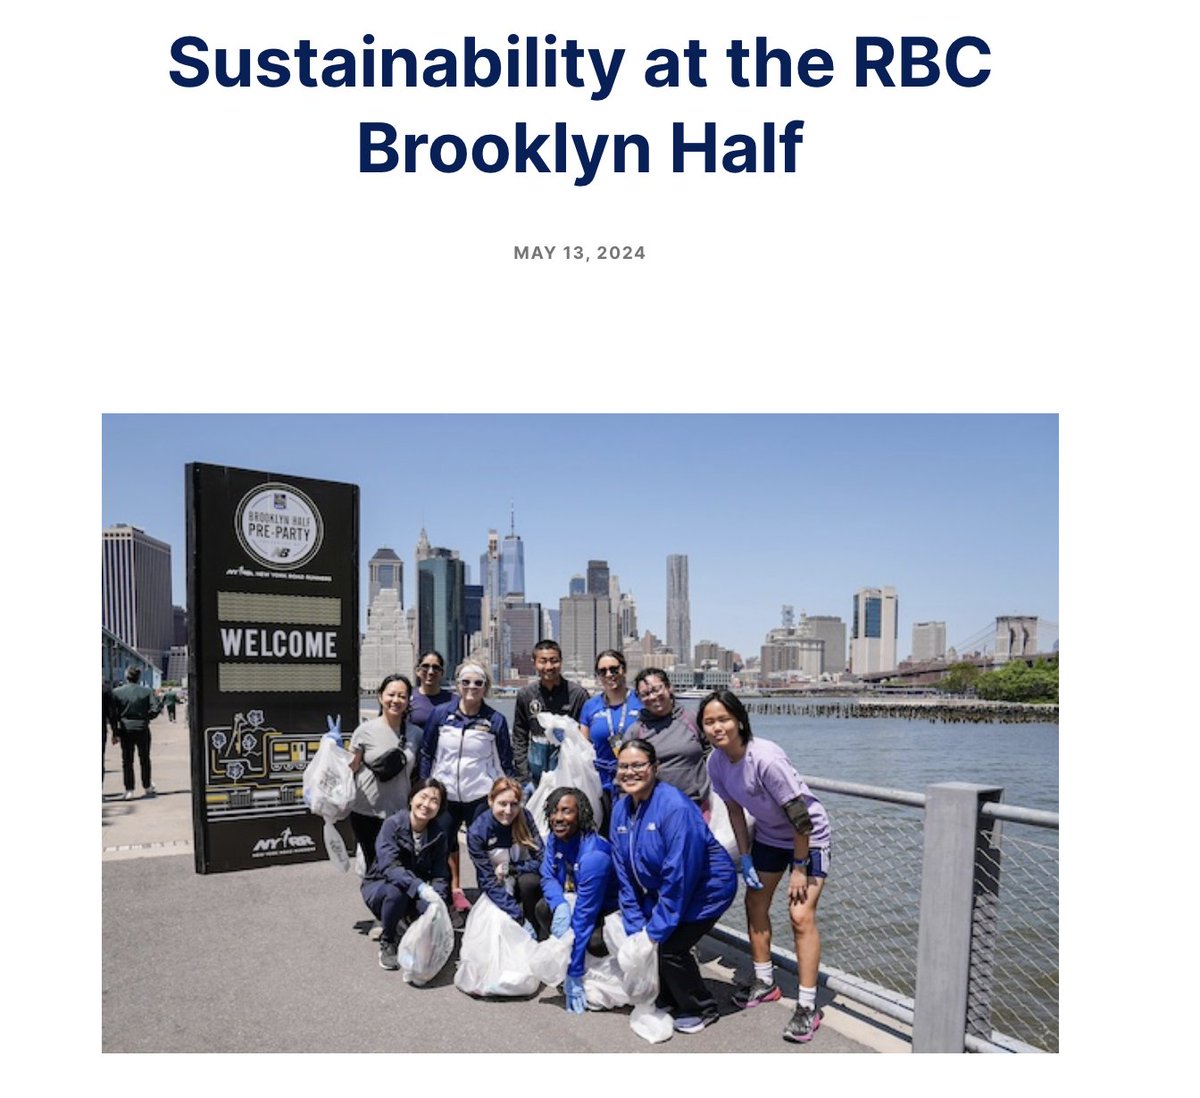 🎽 The RBC Brooklyn Half Marathon is going green this weekend with a plogging event on 17 May + recycled medals, clothing donations, waste sorting/diversion and more for race day 📰 Read more: nyrr.org/run/photos-and… #sportpositive #greensports #sportsforclimateaction